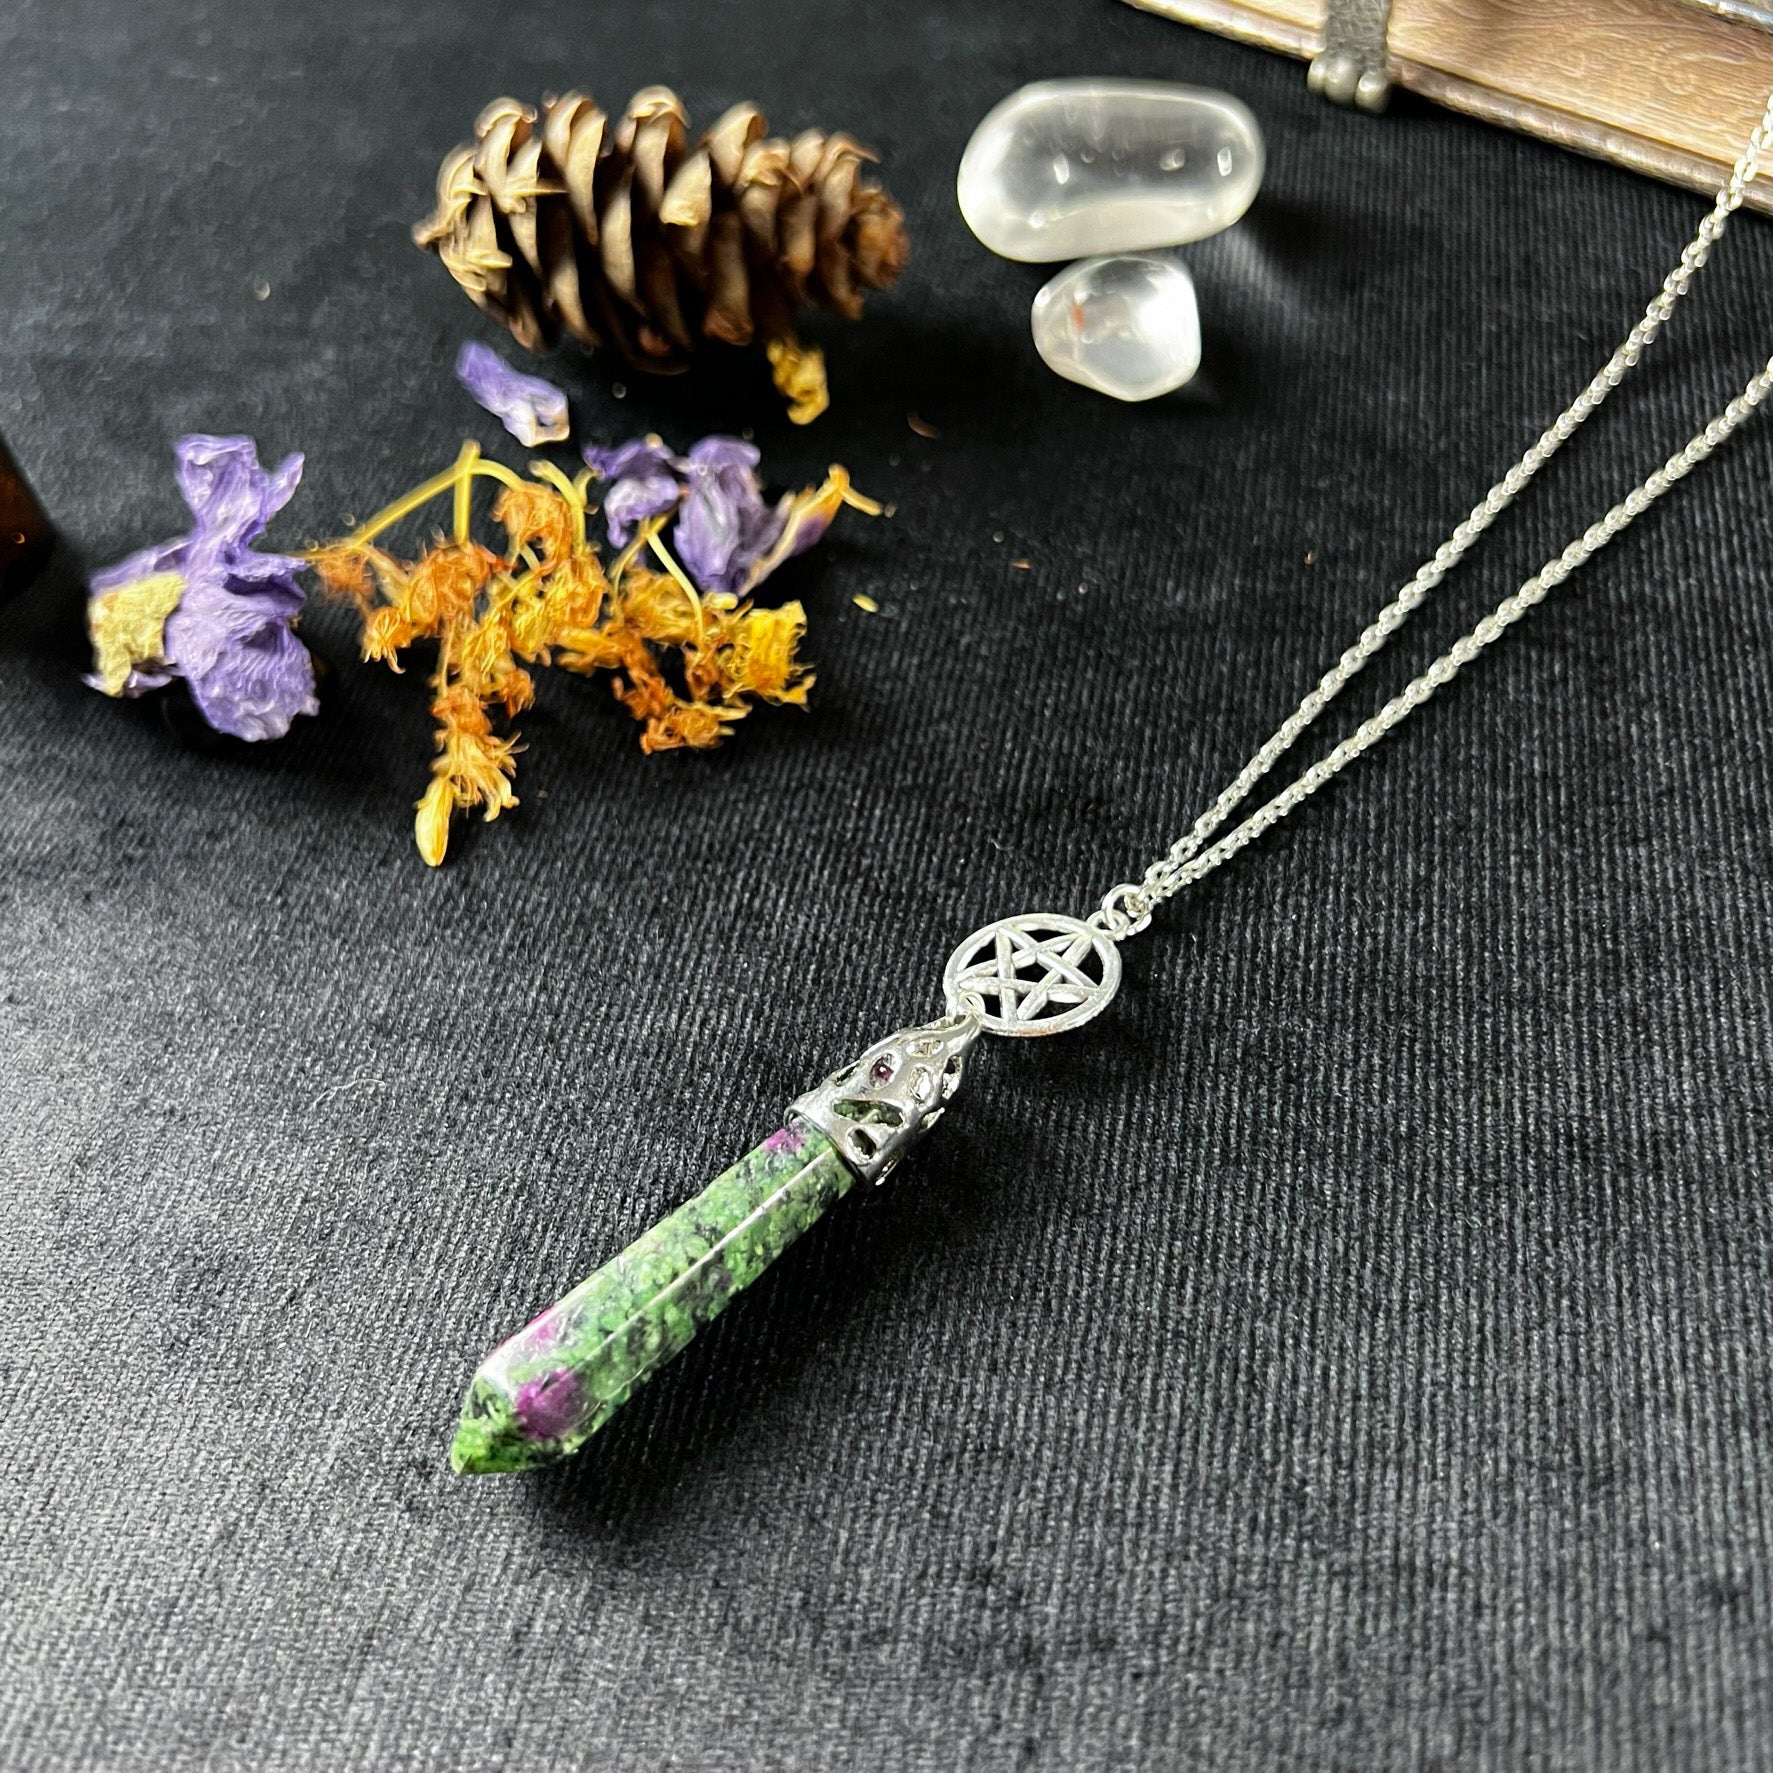 Ruby in Zoisite Anyolite crystal and pentacle divination necklace - The French Witch shop